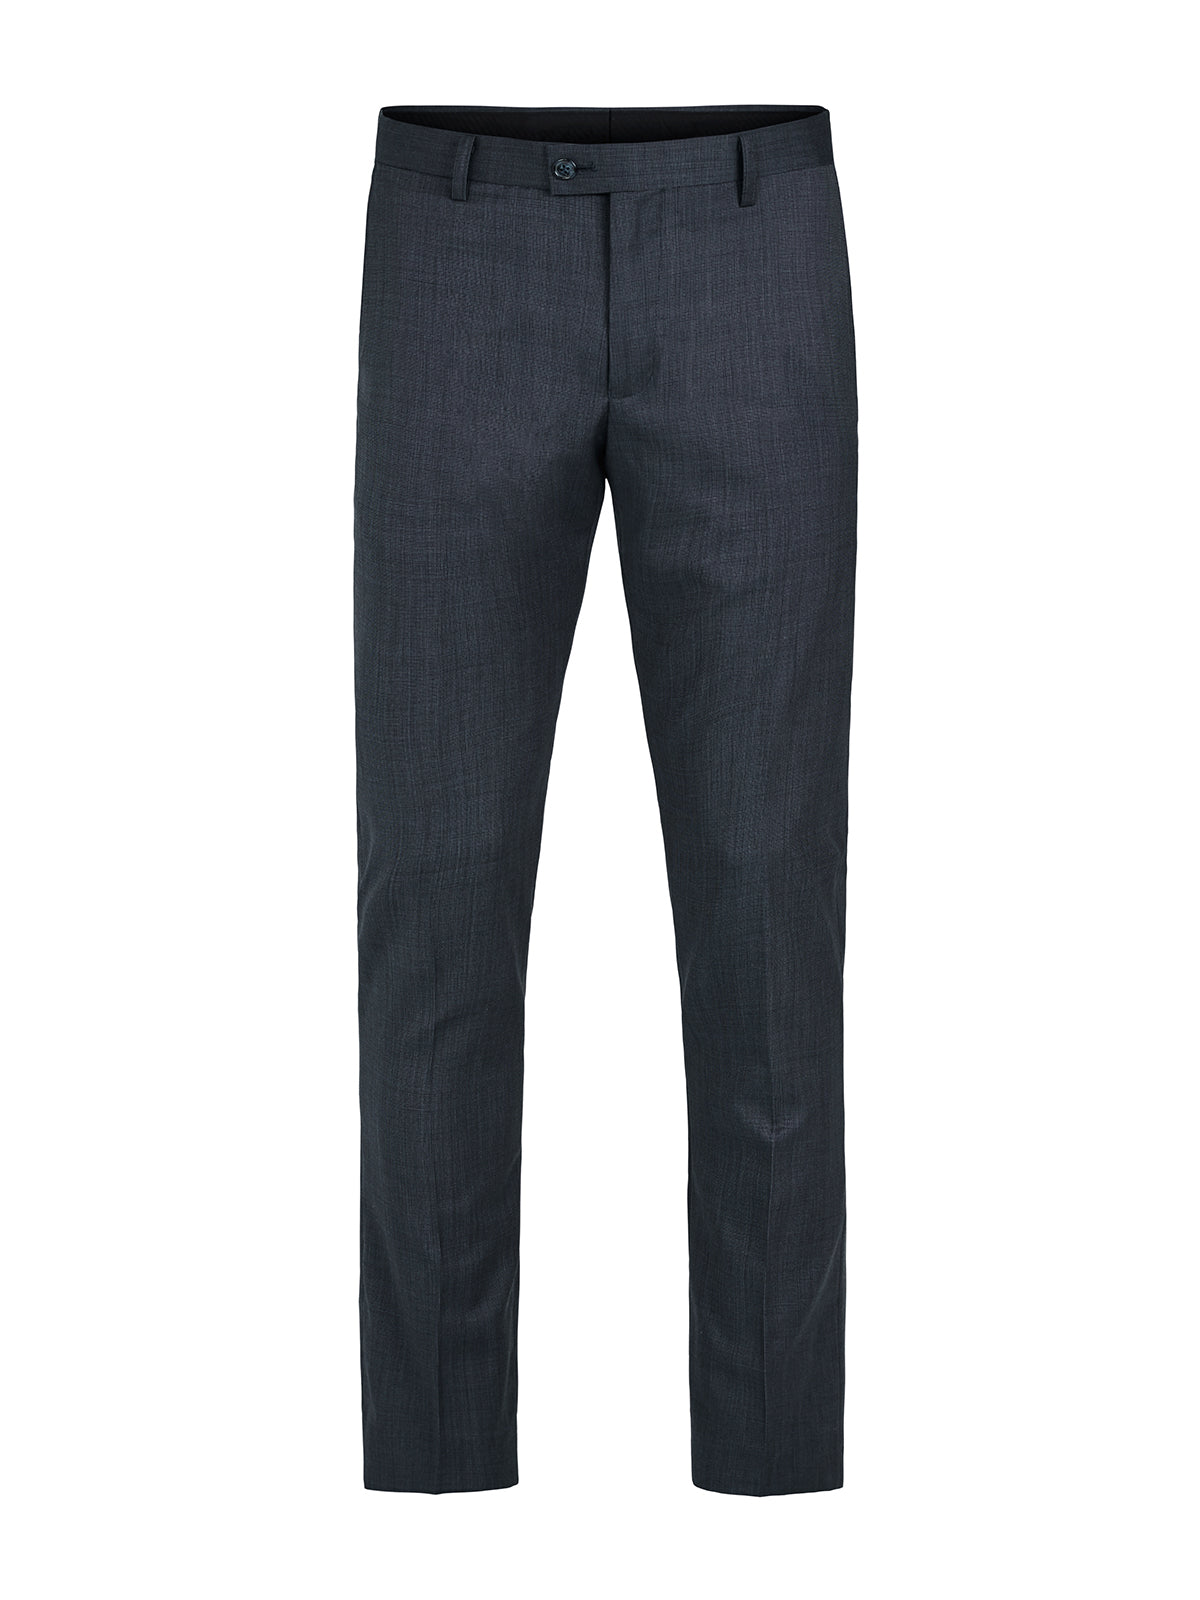 T22 HOPKINS TROUSERS NAVY